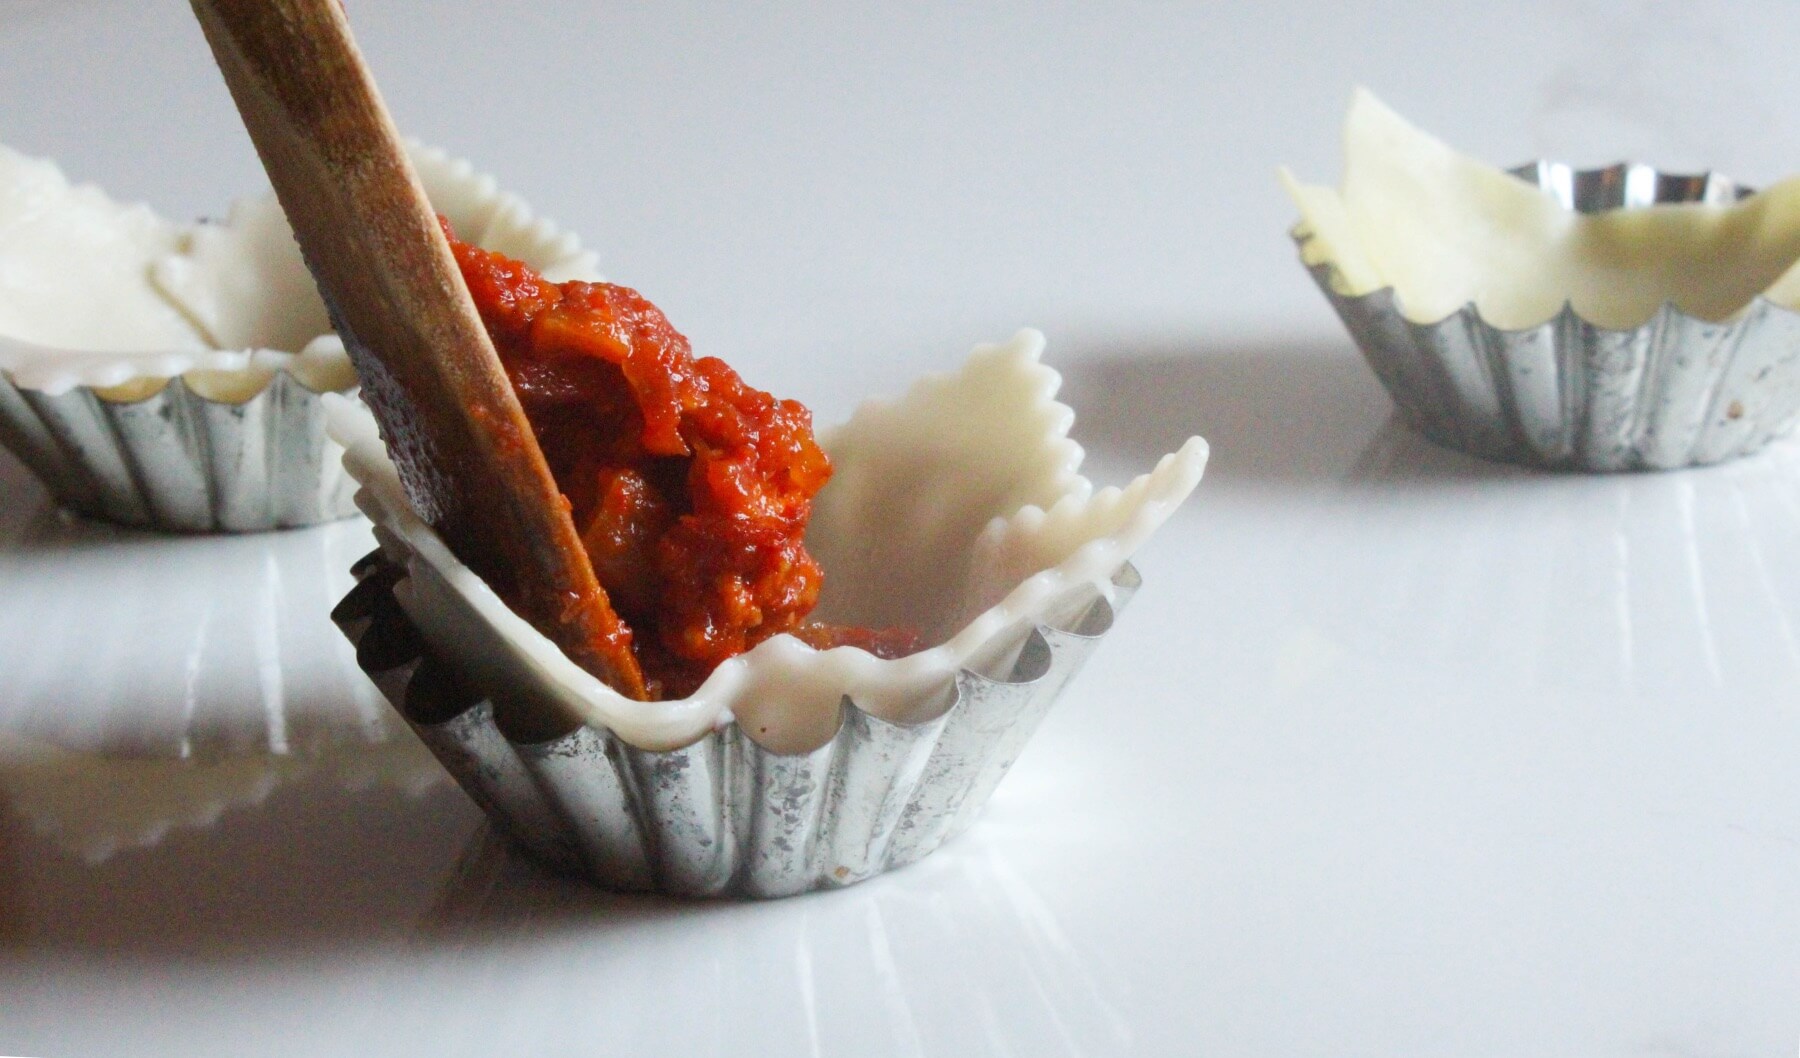 scoop tomato sauce into the lasagne cups